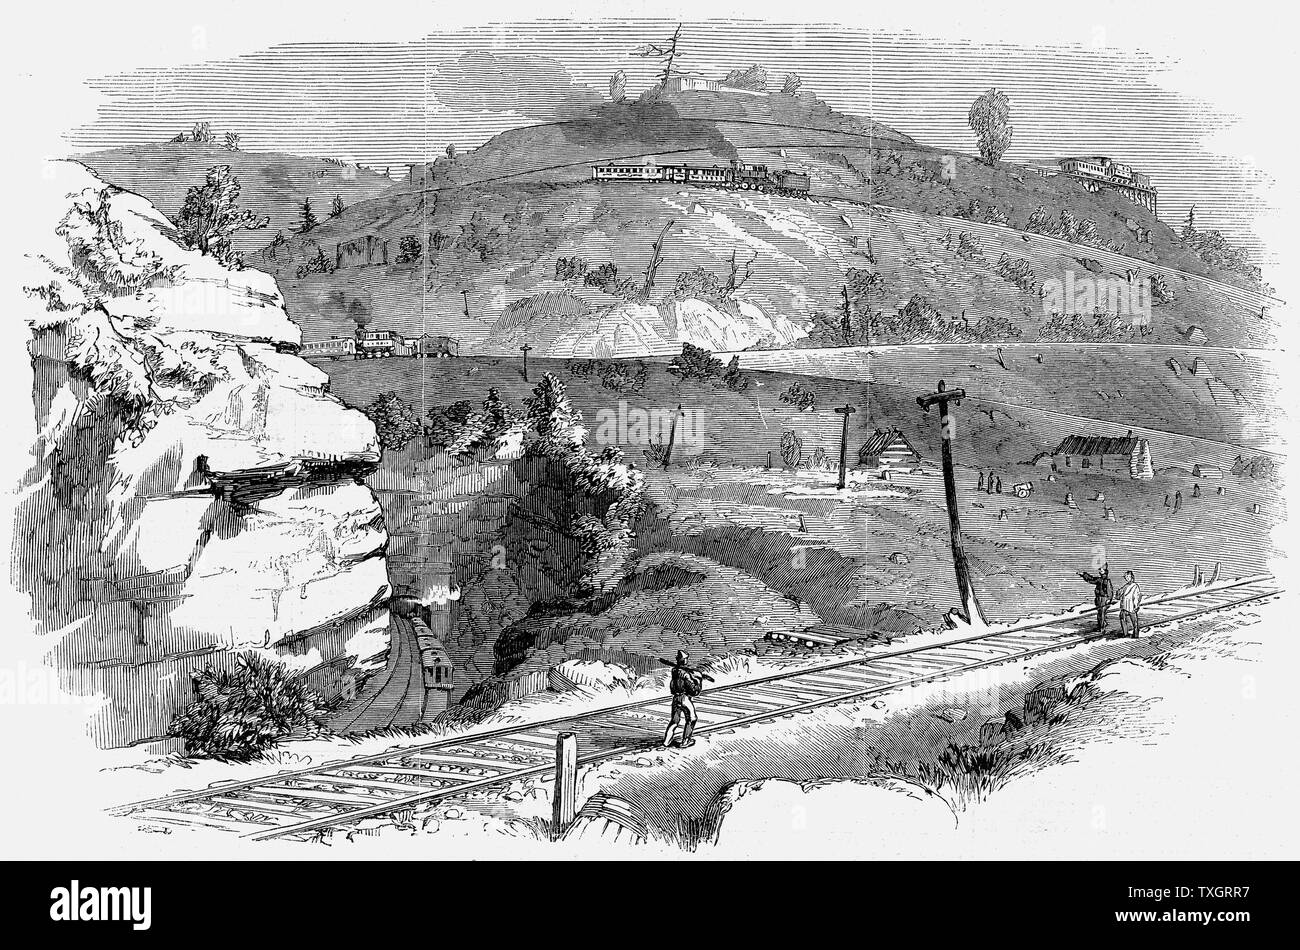 Baltimore and Ohio Railroad: Ladder of inclines over Boardtree Hill which allowed two carriages at a time from a full train to be shunted up an over the hill. This system operated until the Kingwood Tunnel was driven through the Alleghany Mountains.  1861 wood engraving From 'The Illustrated London News' Stock Photo